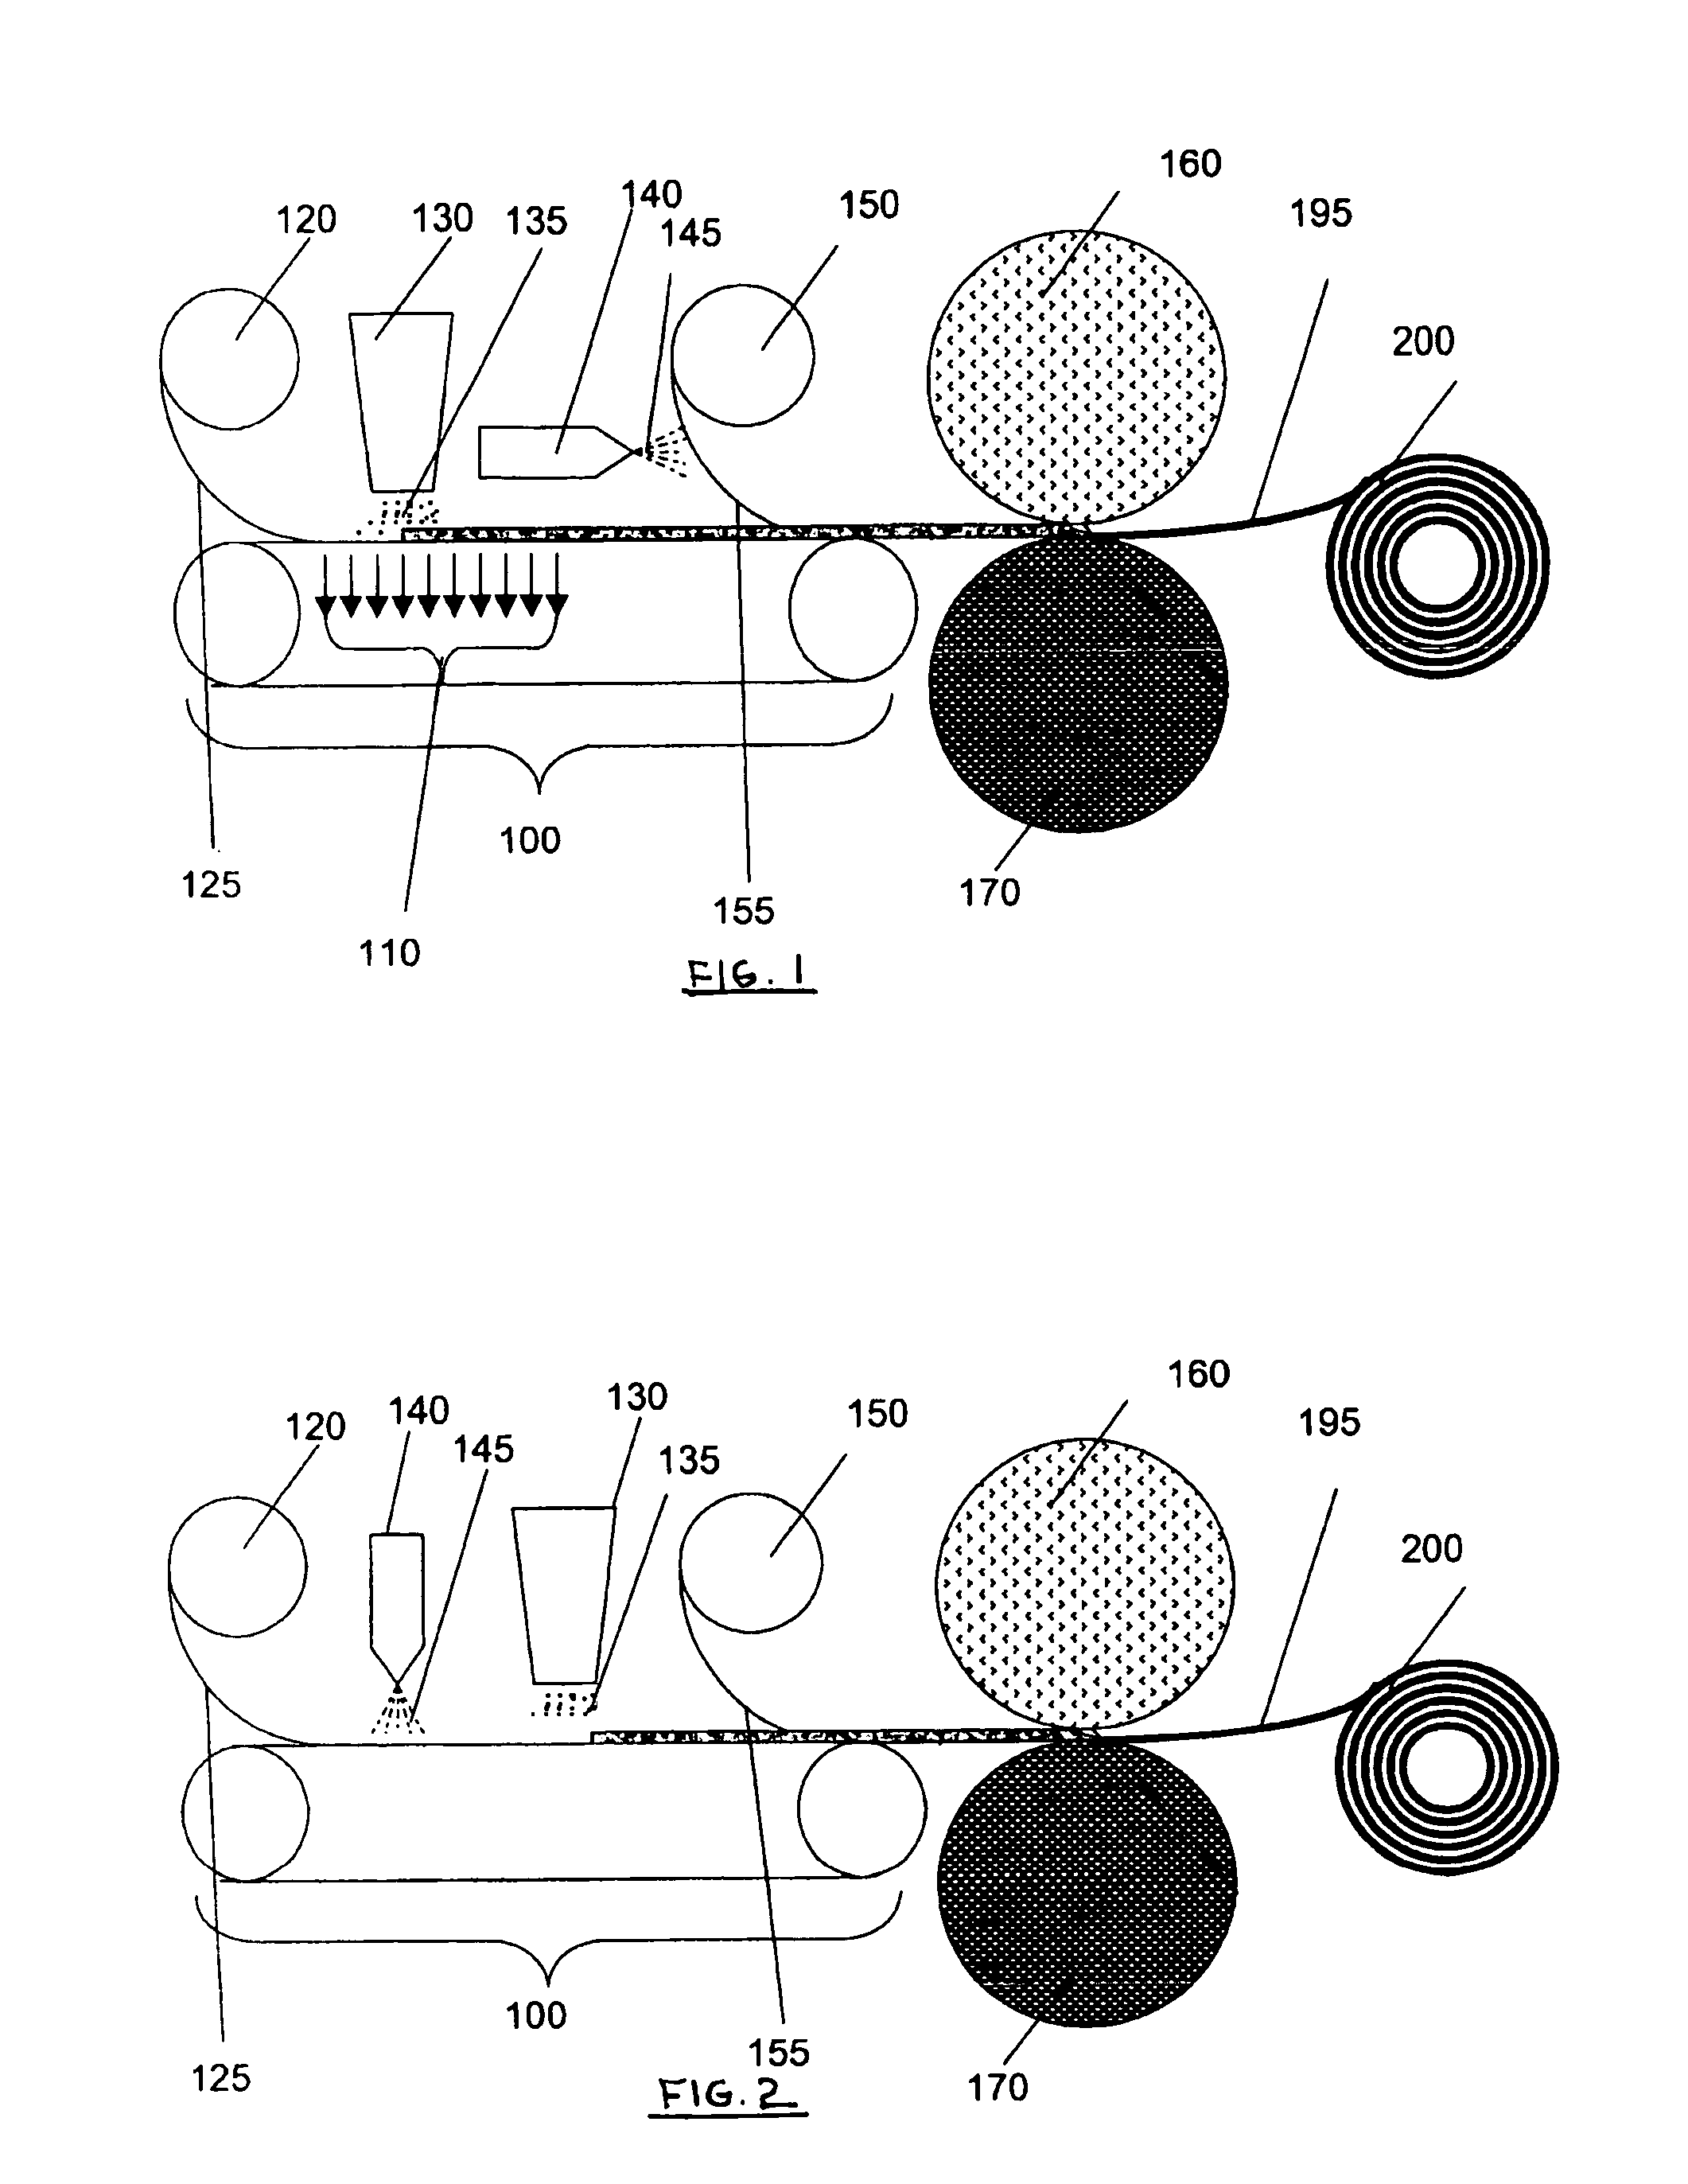 Method of making an absorbent composite and absorbent articles employing the same